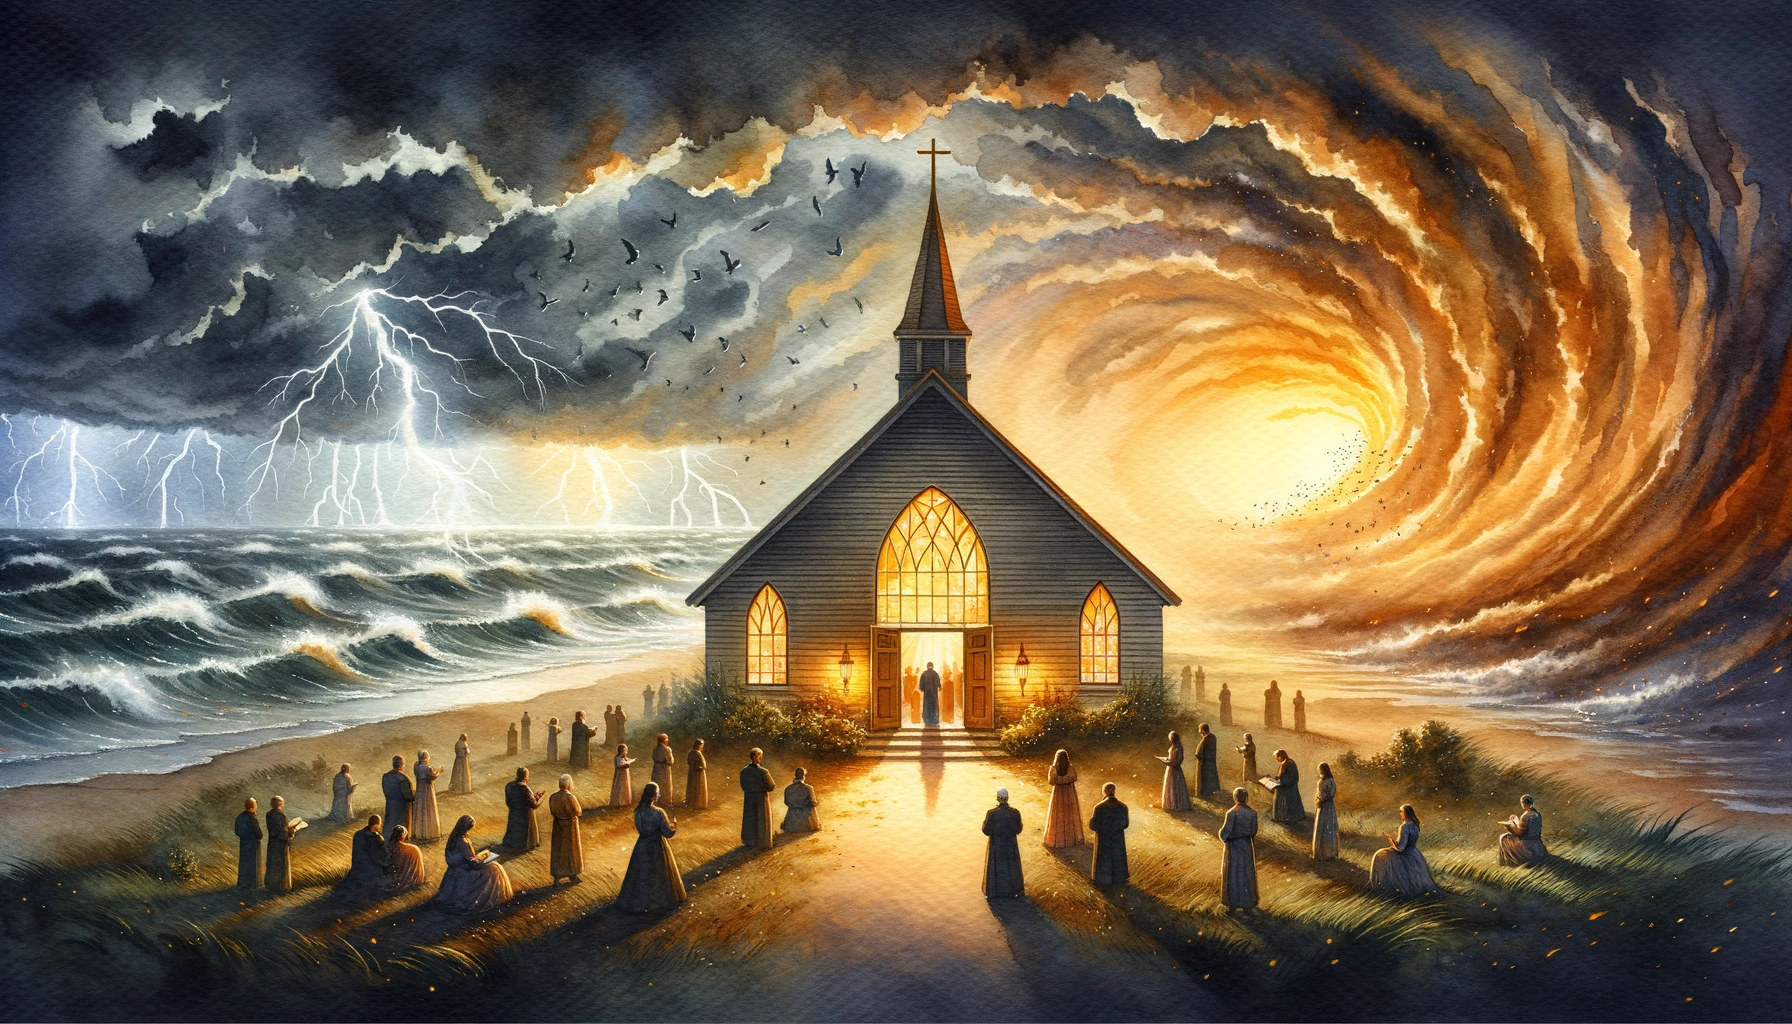 End times chapel in chaos with whirlwinds and lightning outside. Inside, people gather, praying. Warm glow contrasts with dark surroundings, symbolizing faith's refuge.